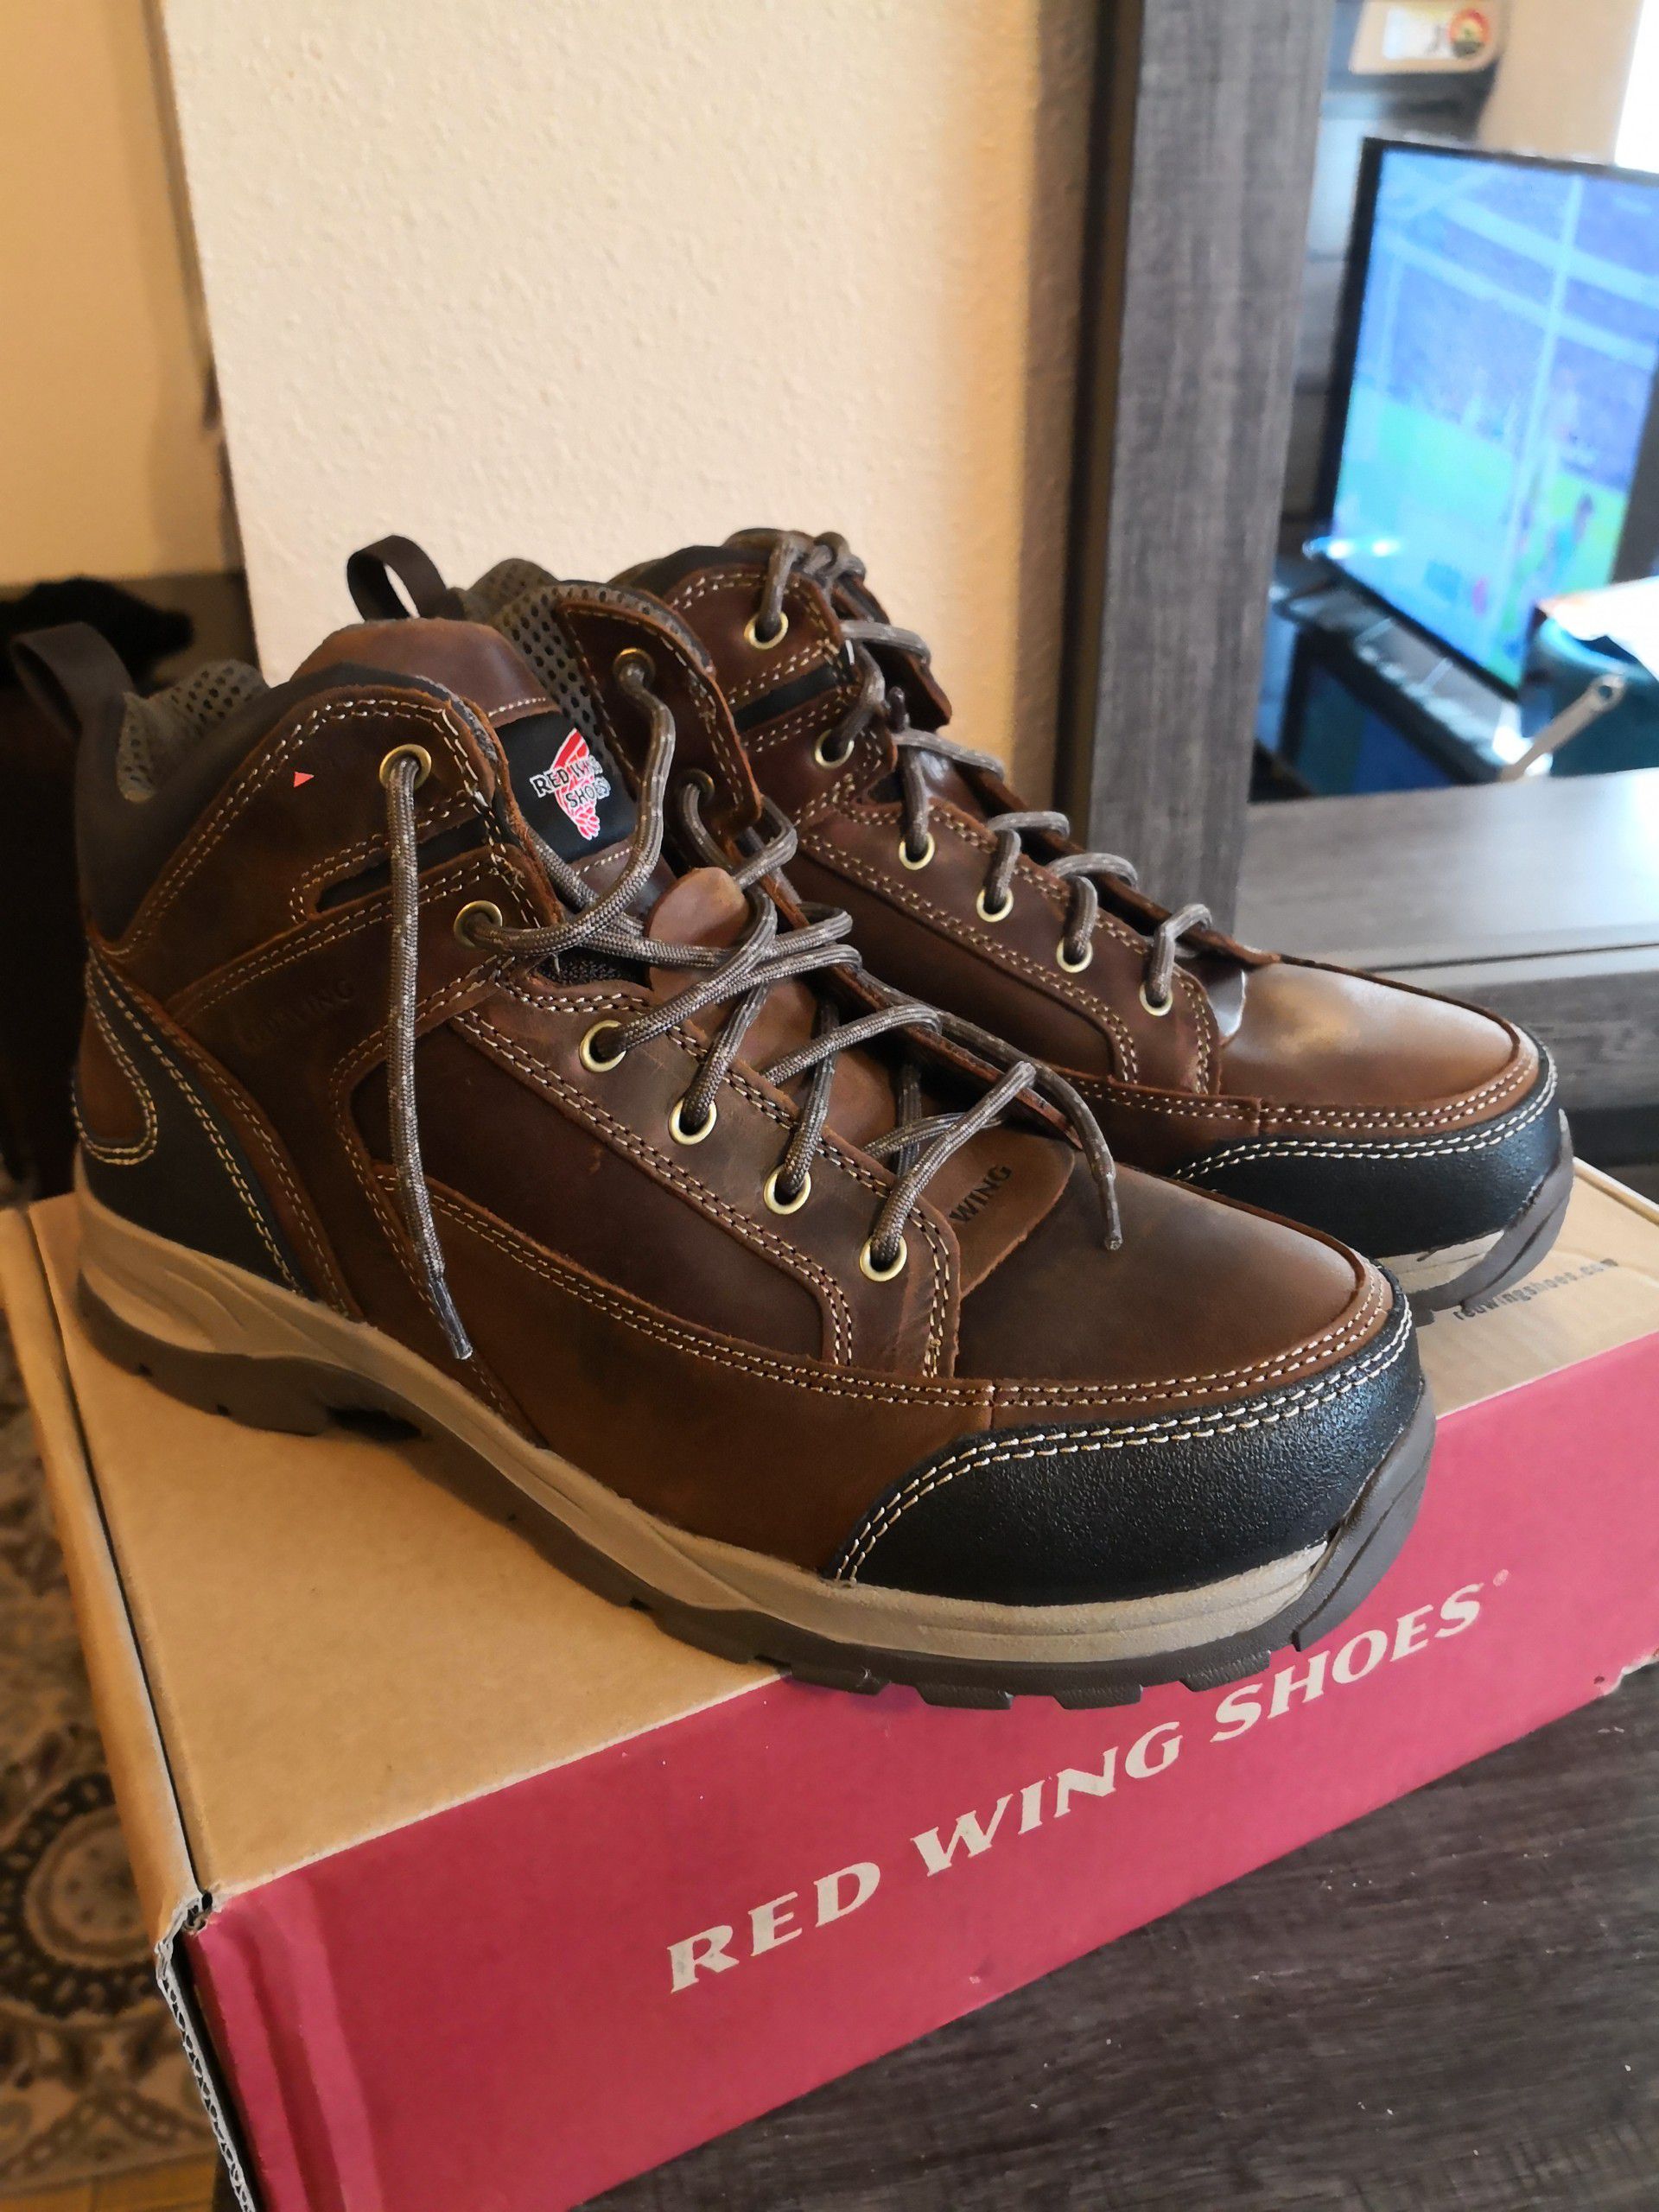 Brand new red wings boots